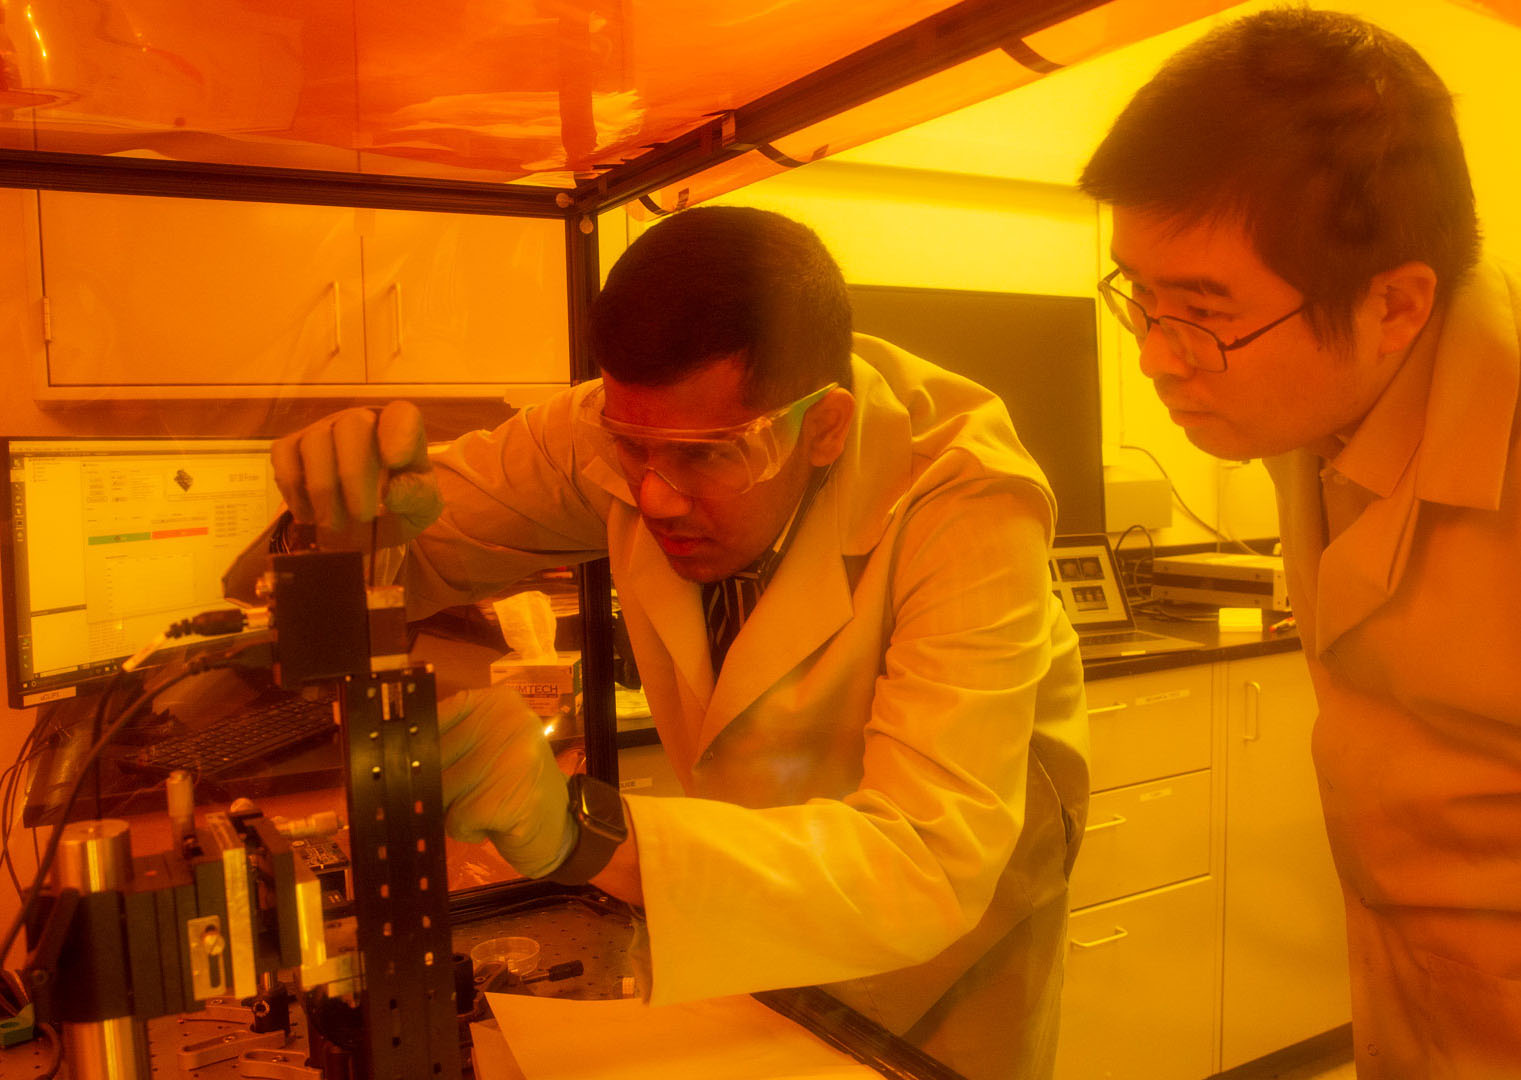 Two researchers look at a piece of lab equipment in a research lab under yellow lights.